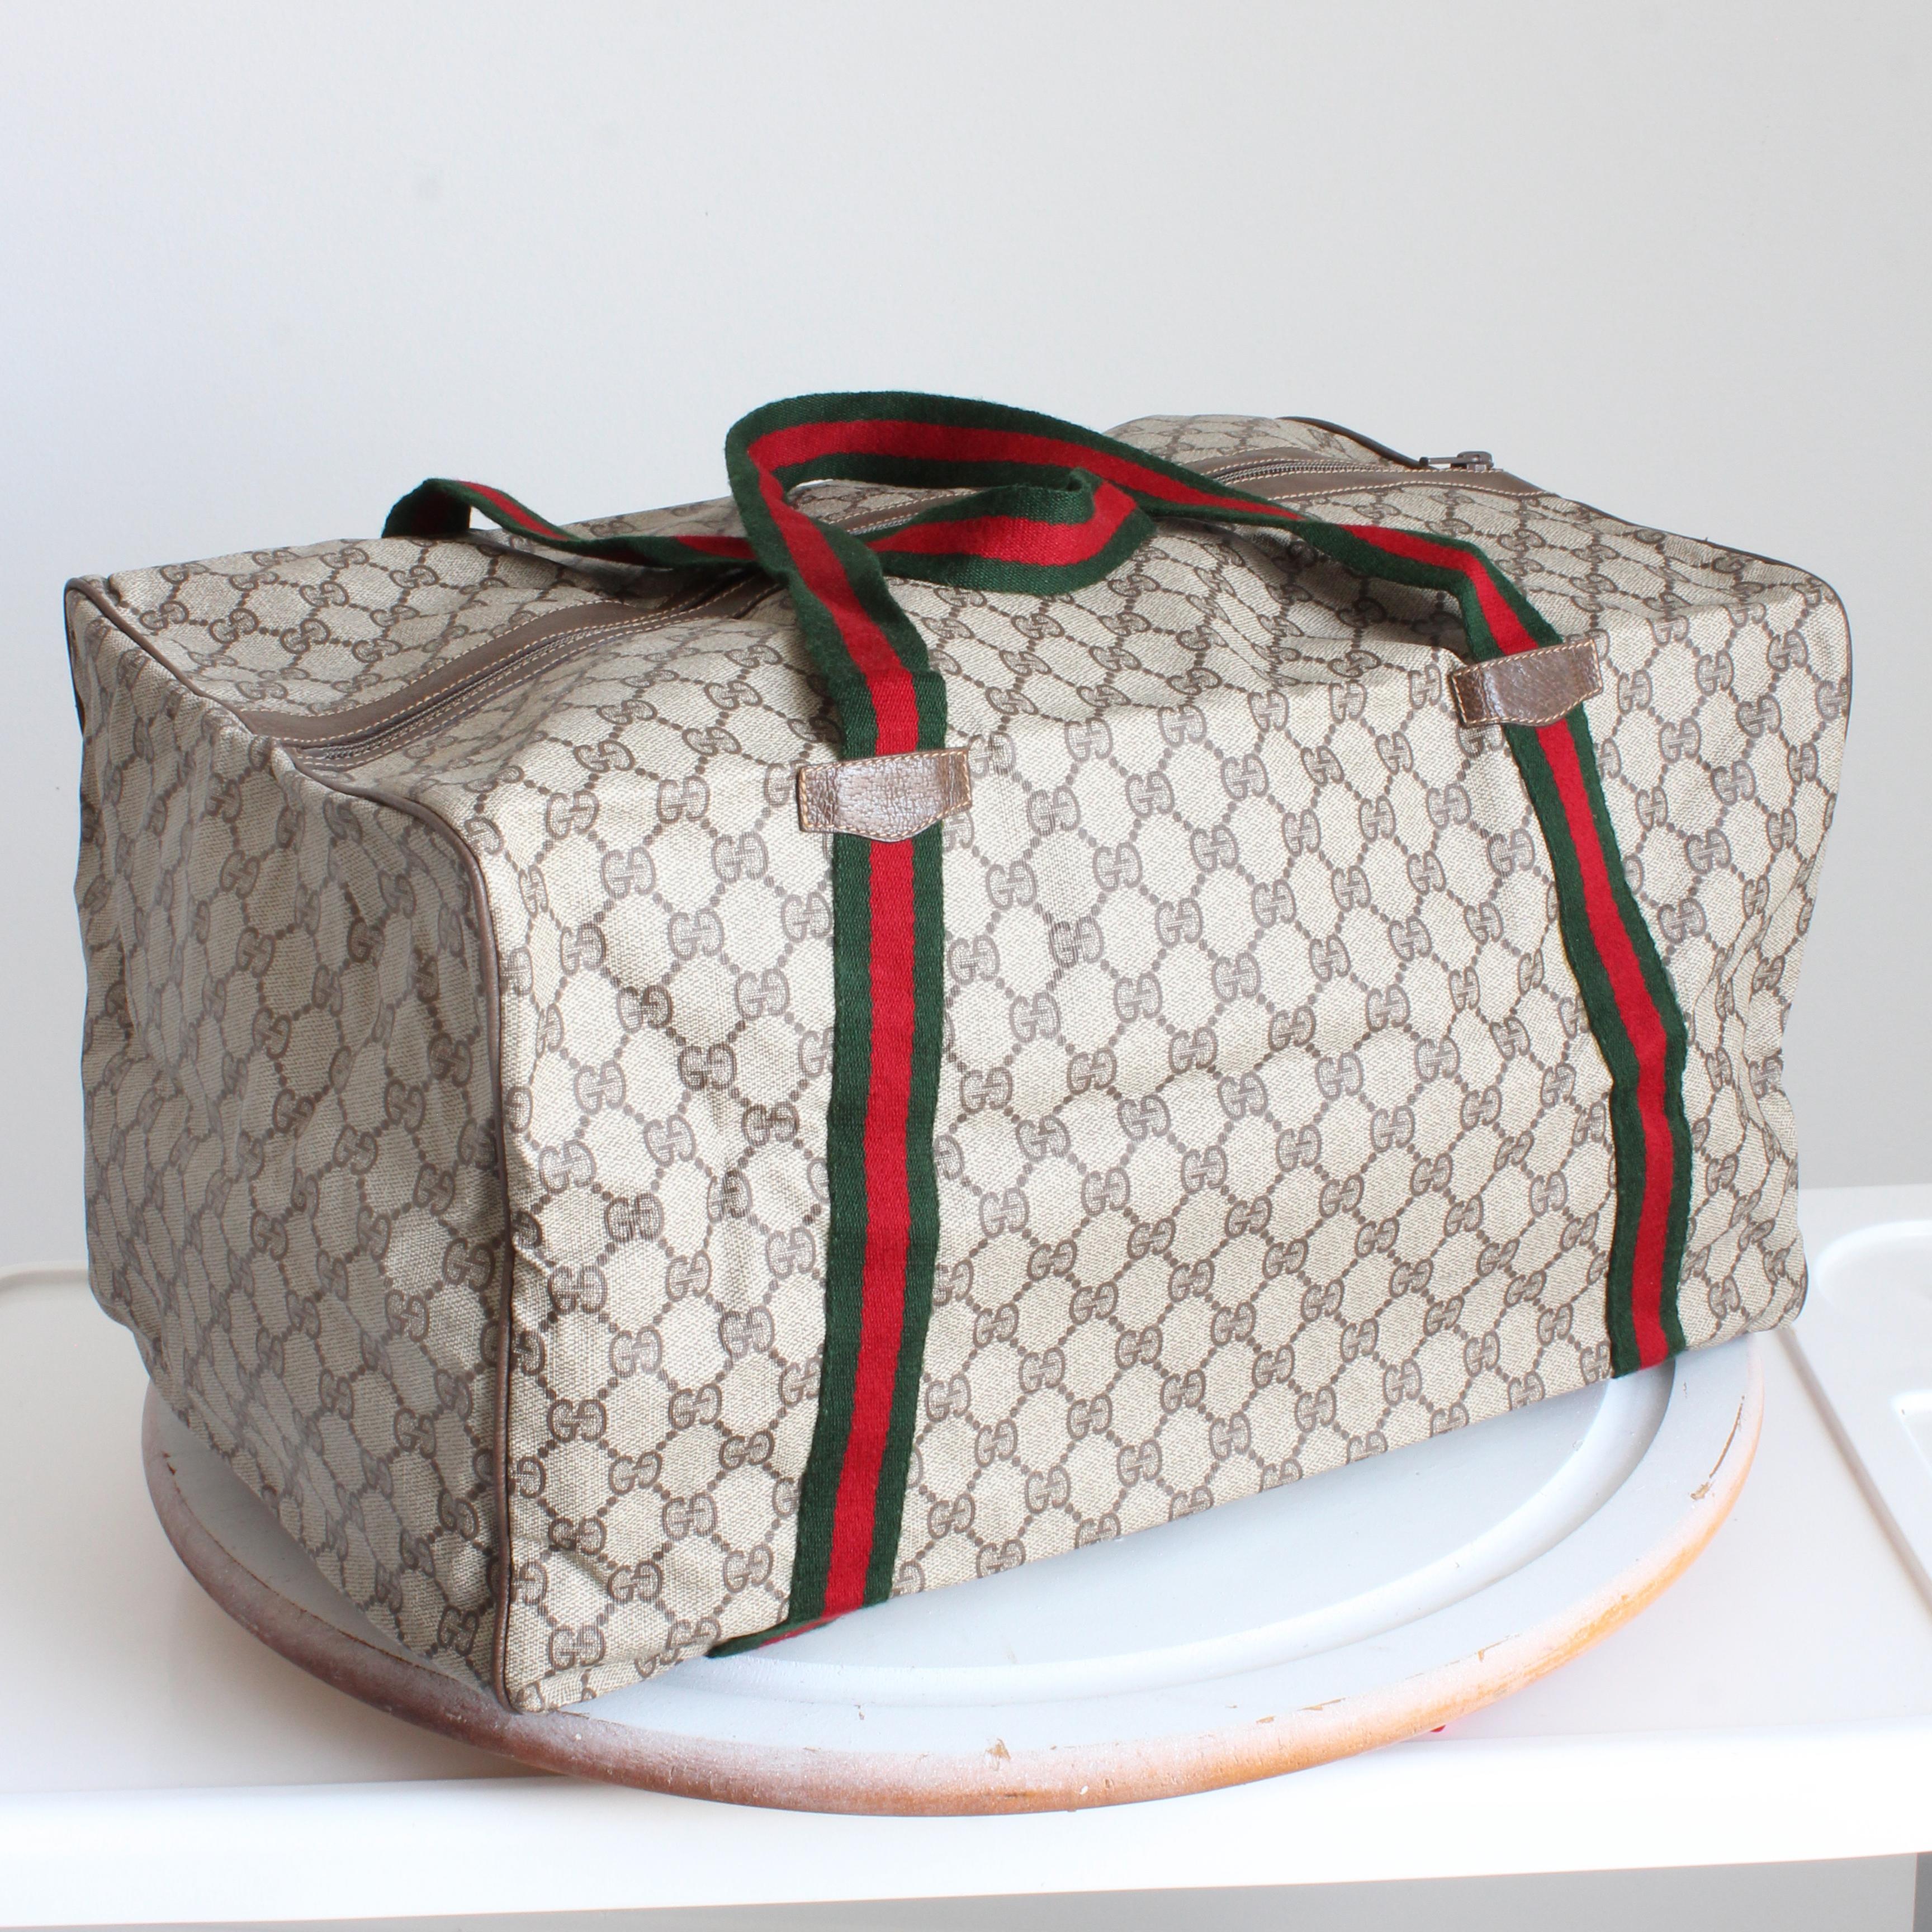 Gucci Duffle Bag GG Logo Canvas Brown Leather Trim Folding Travel Carry On 80s In Good Condition For Sale In Port Saint Lucie, FL